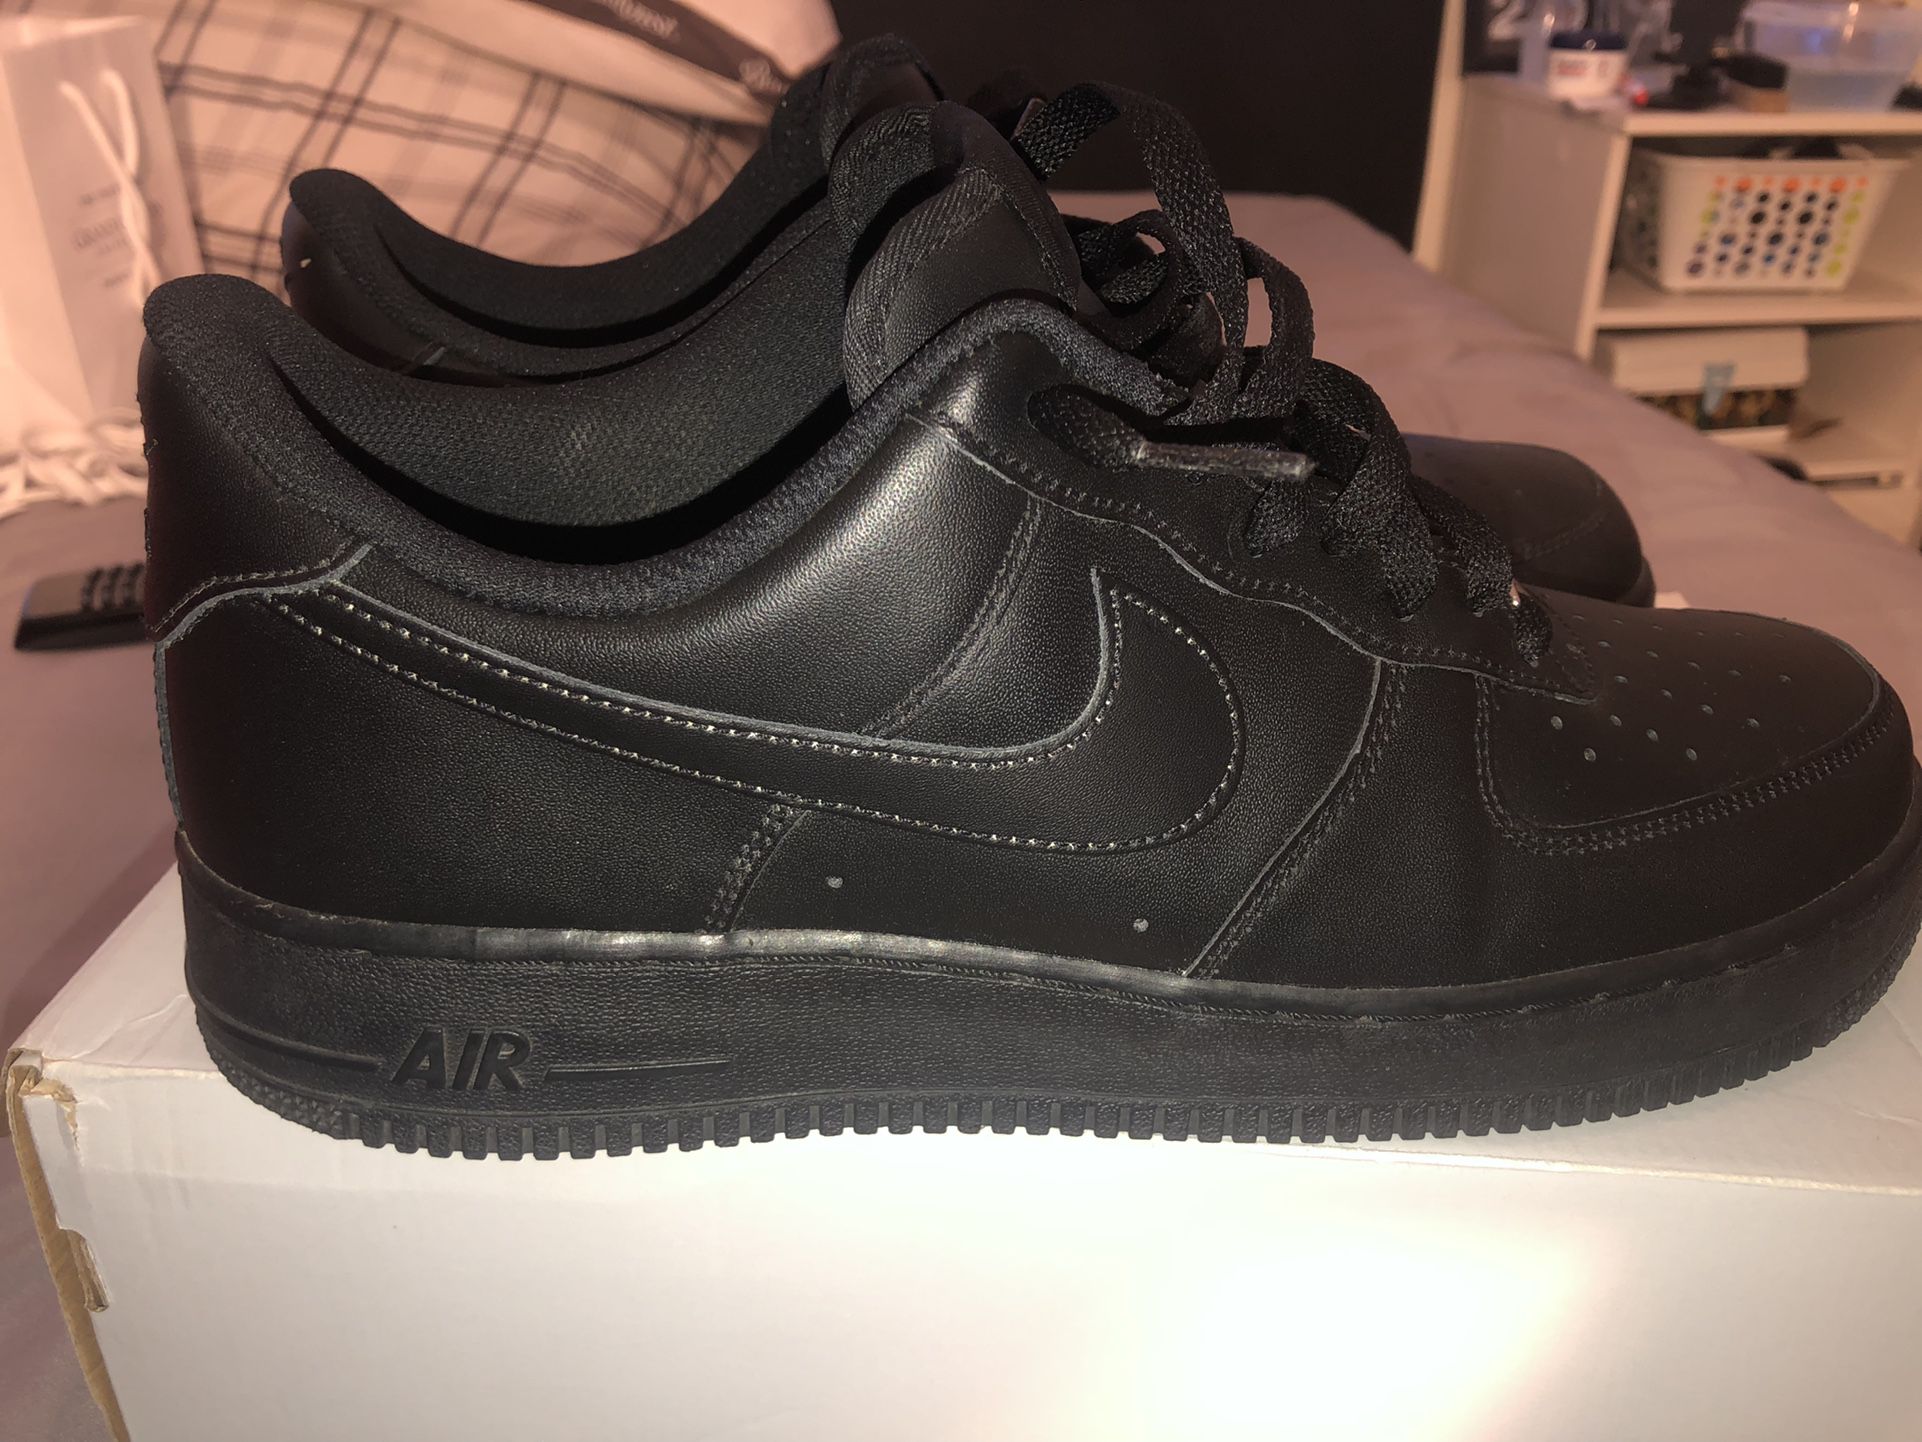 Retail $200: Nike Air Force 1 '07 LV8 'Metallic Double Swoosh Pack Black'  in Men’s Size 10 for Sale in Glendale, AZ - OfferUp